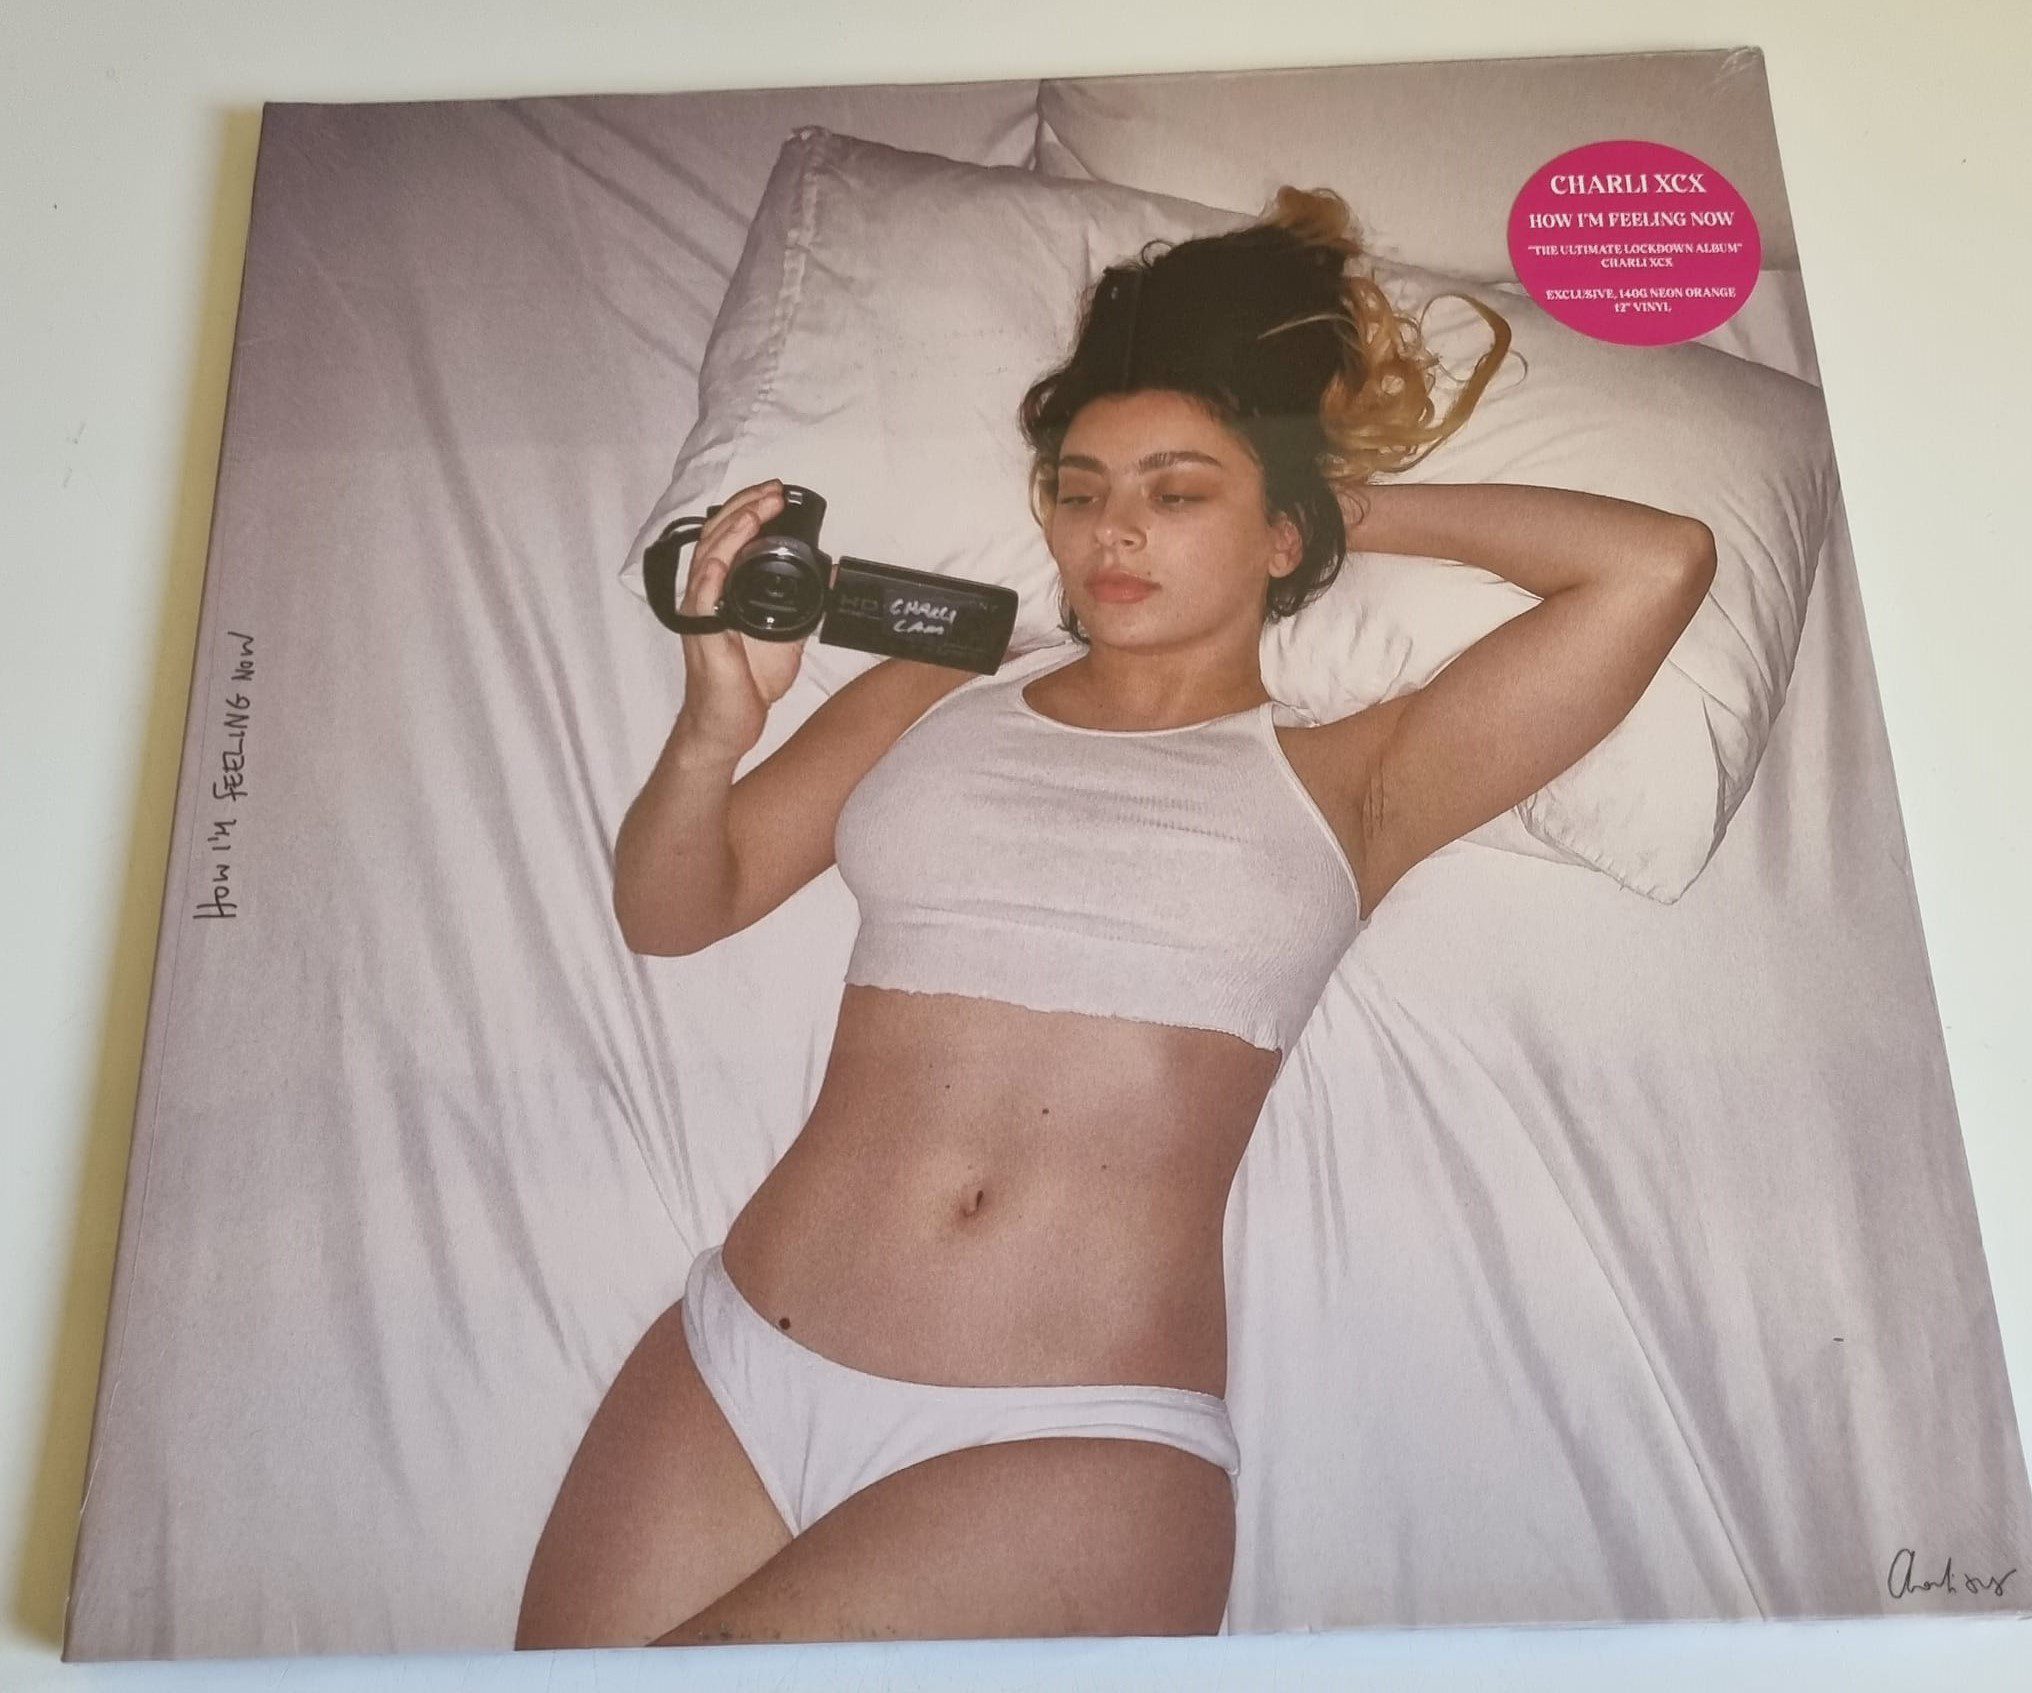 Buy this rare Charli XCX record by clicking here